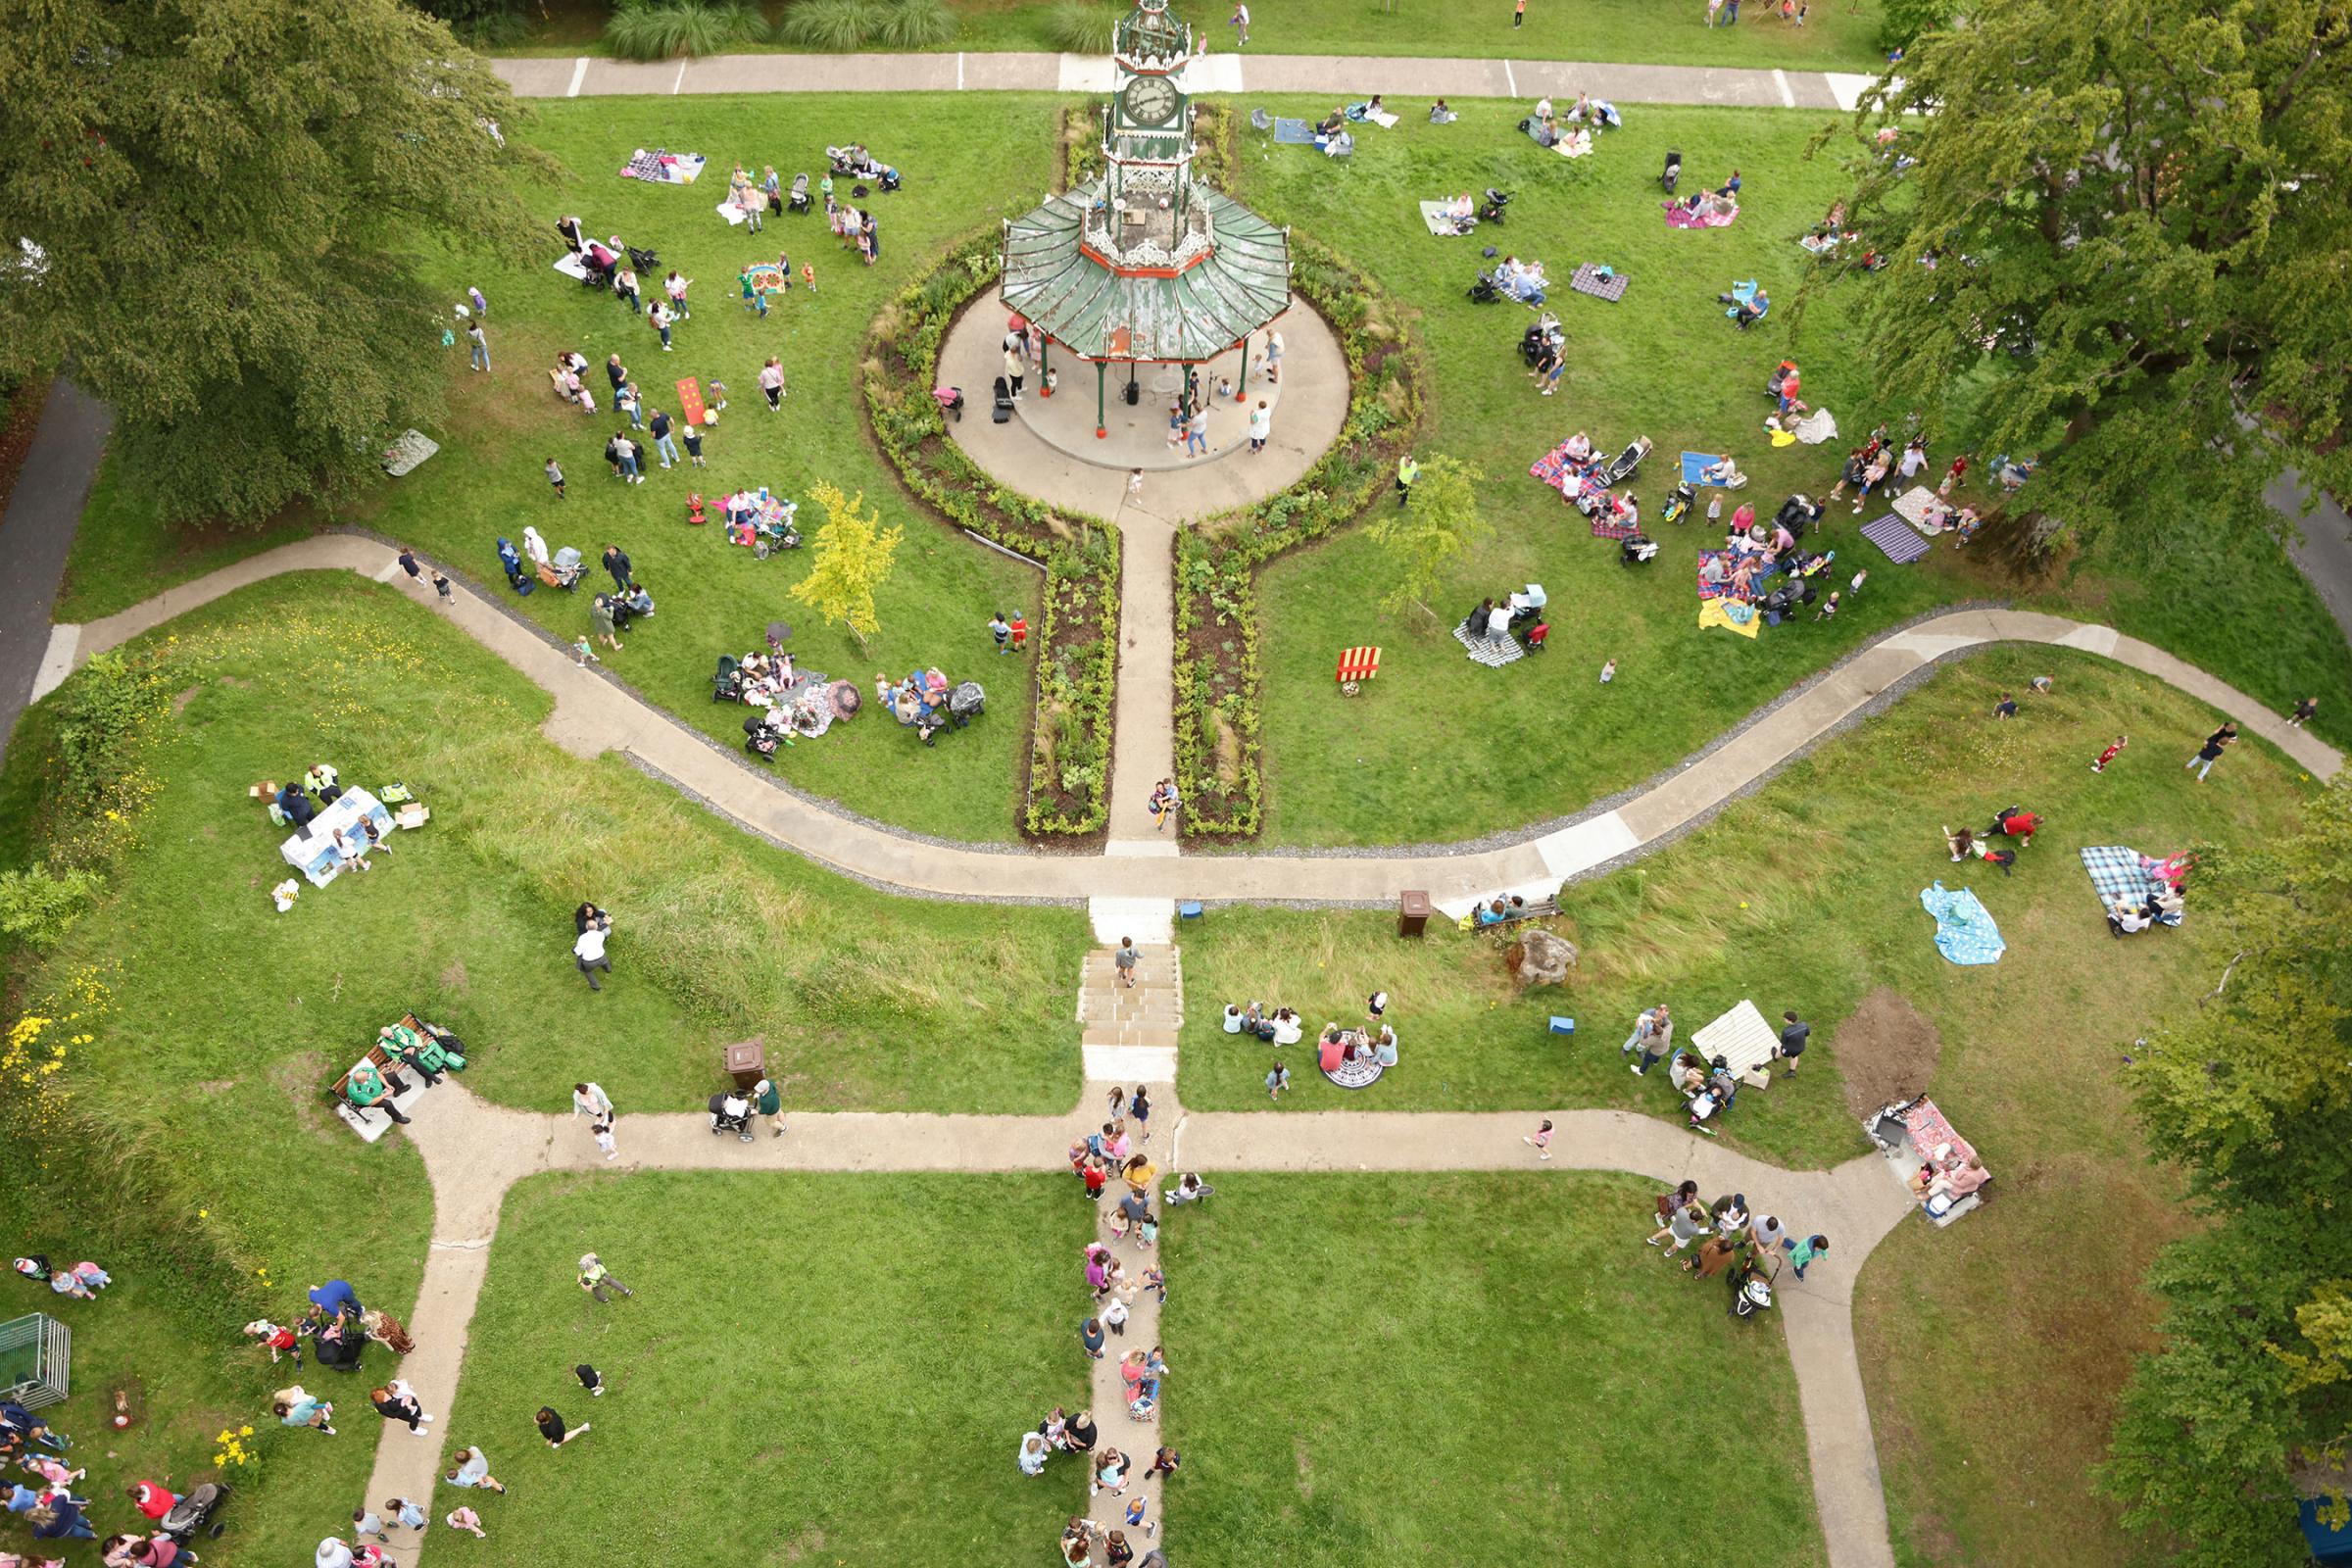 A birds eye view of the party in Forthill Park.